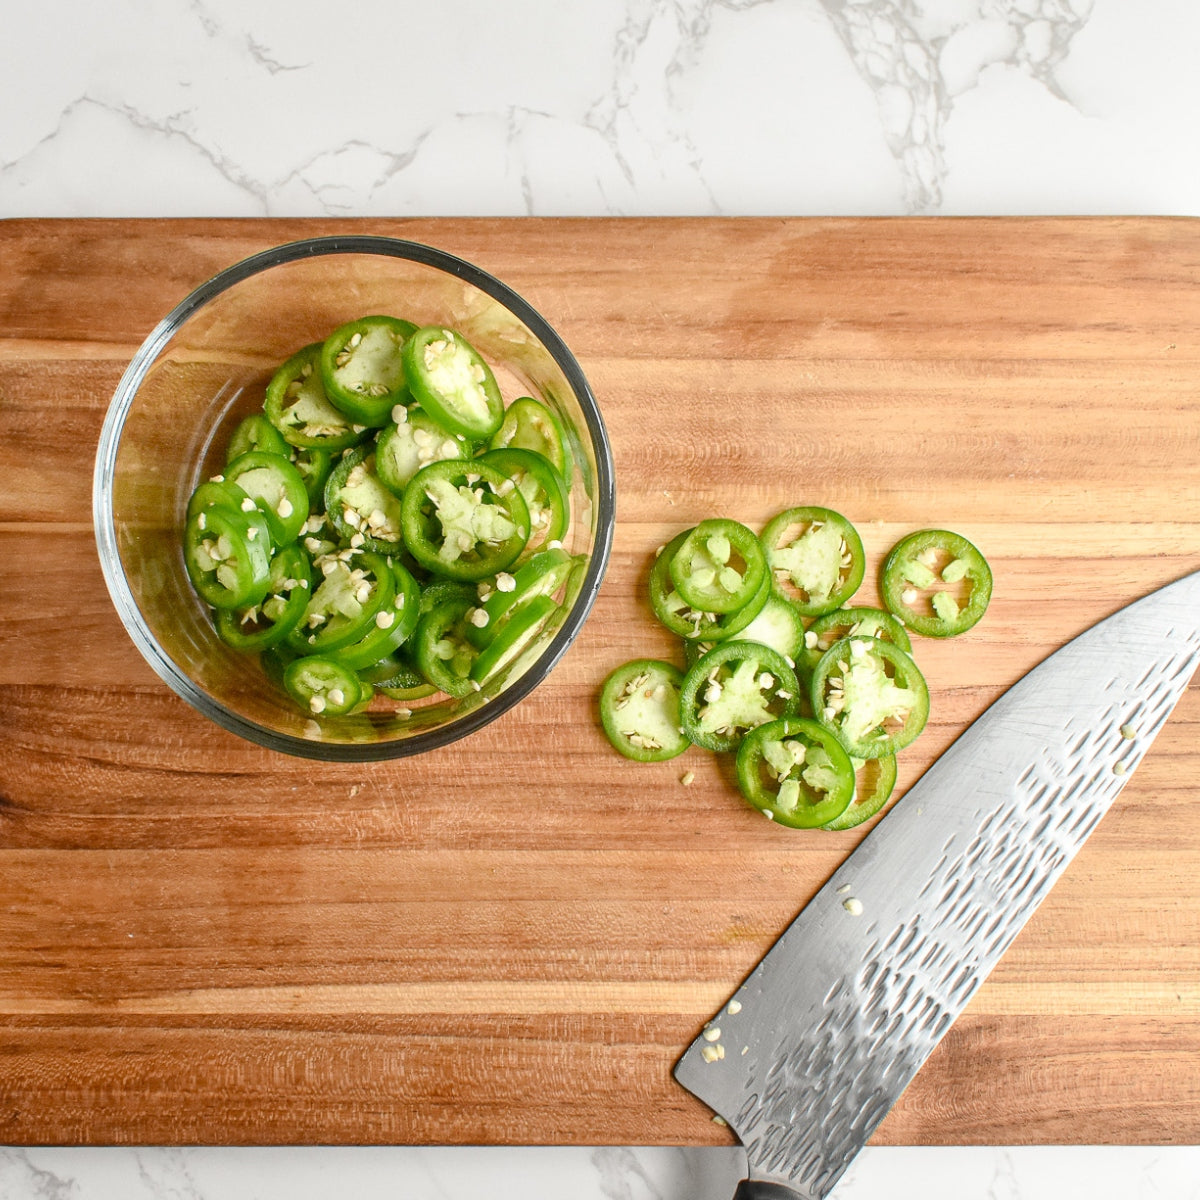 Jalapeño peppers being chopped on a cutting board.